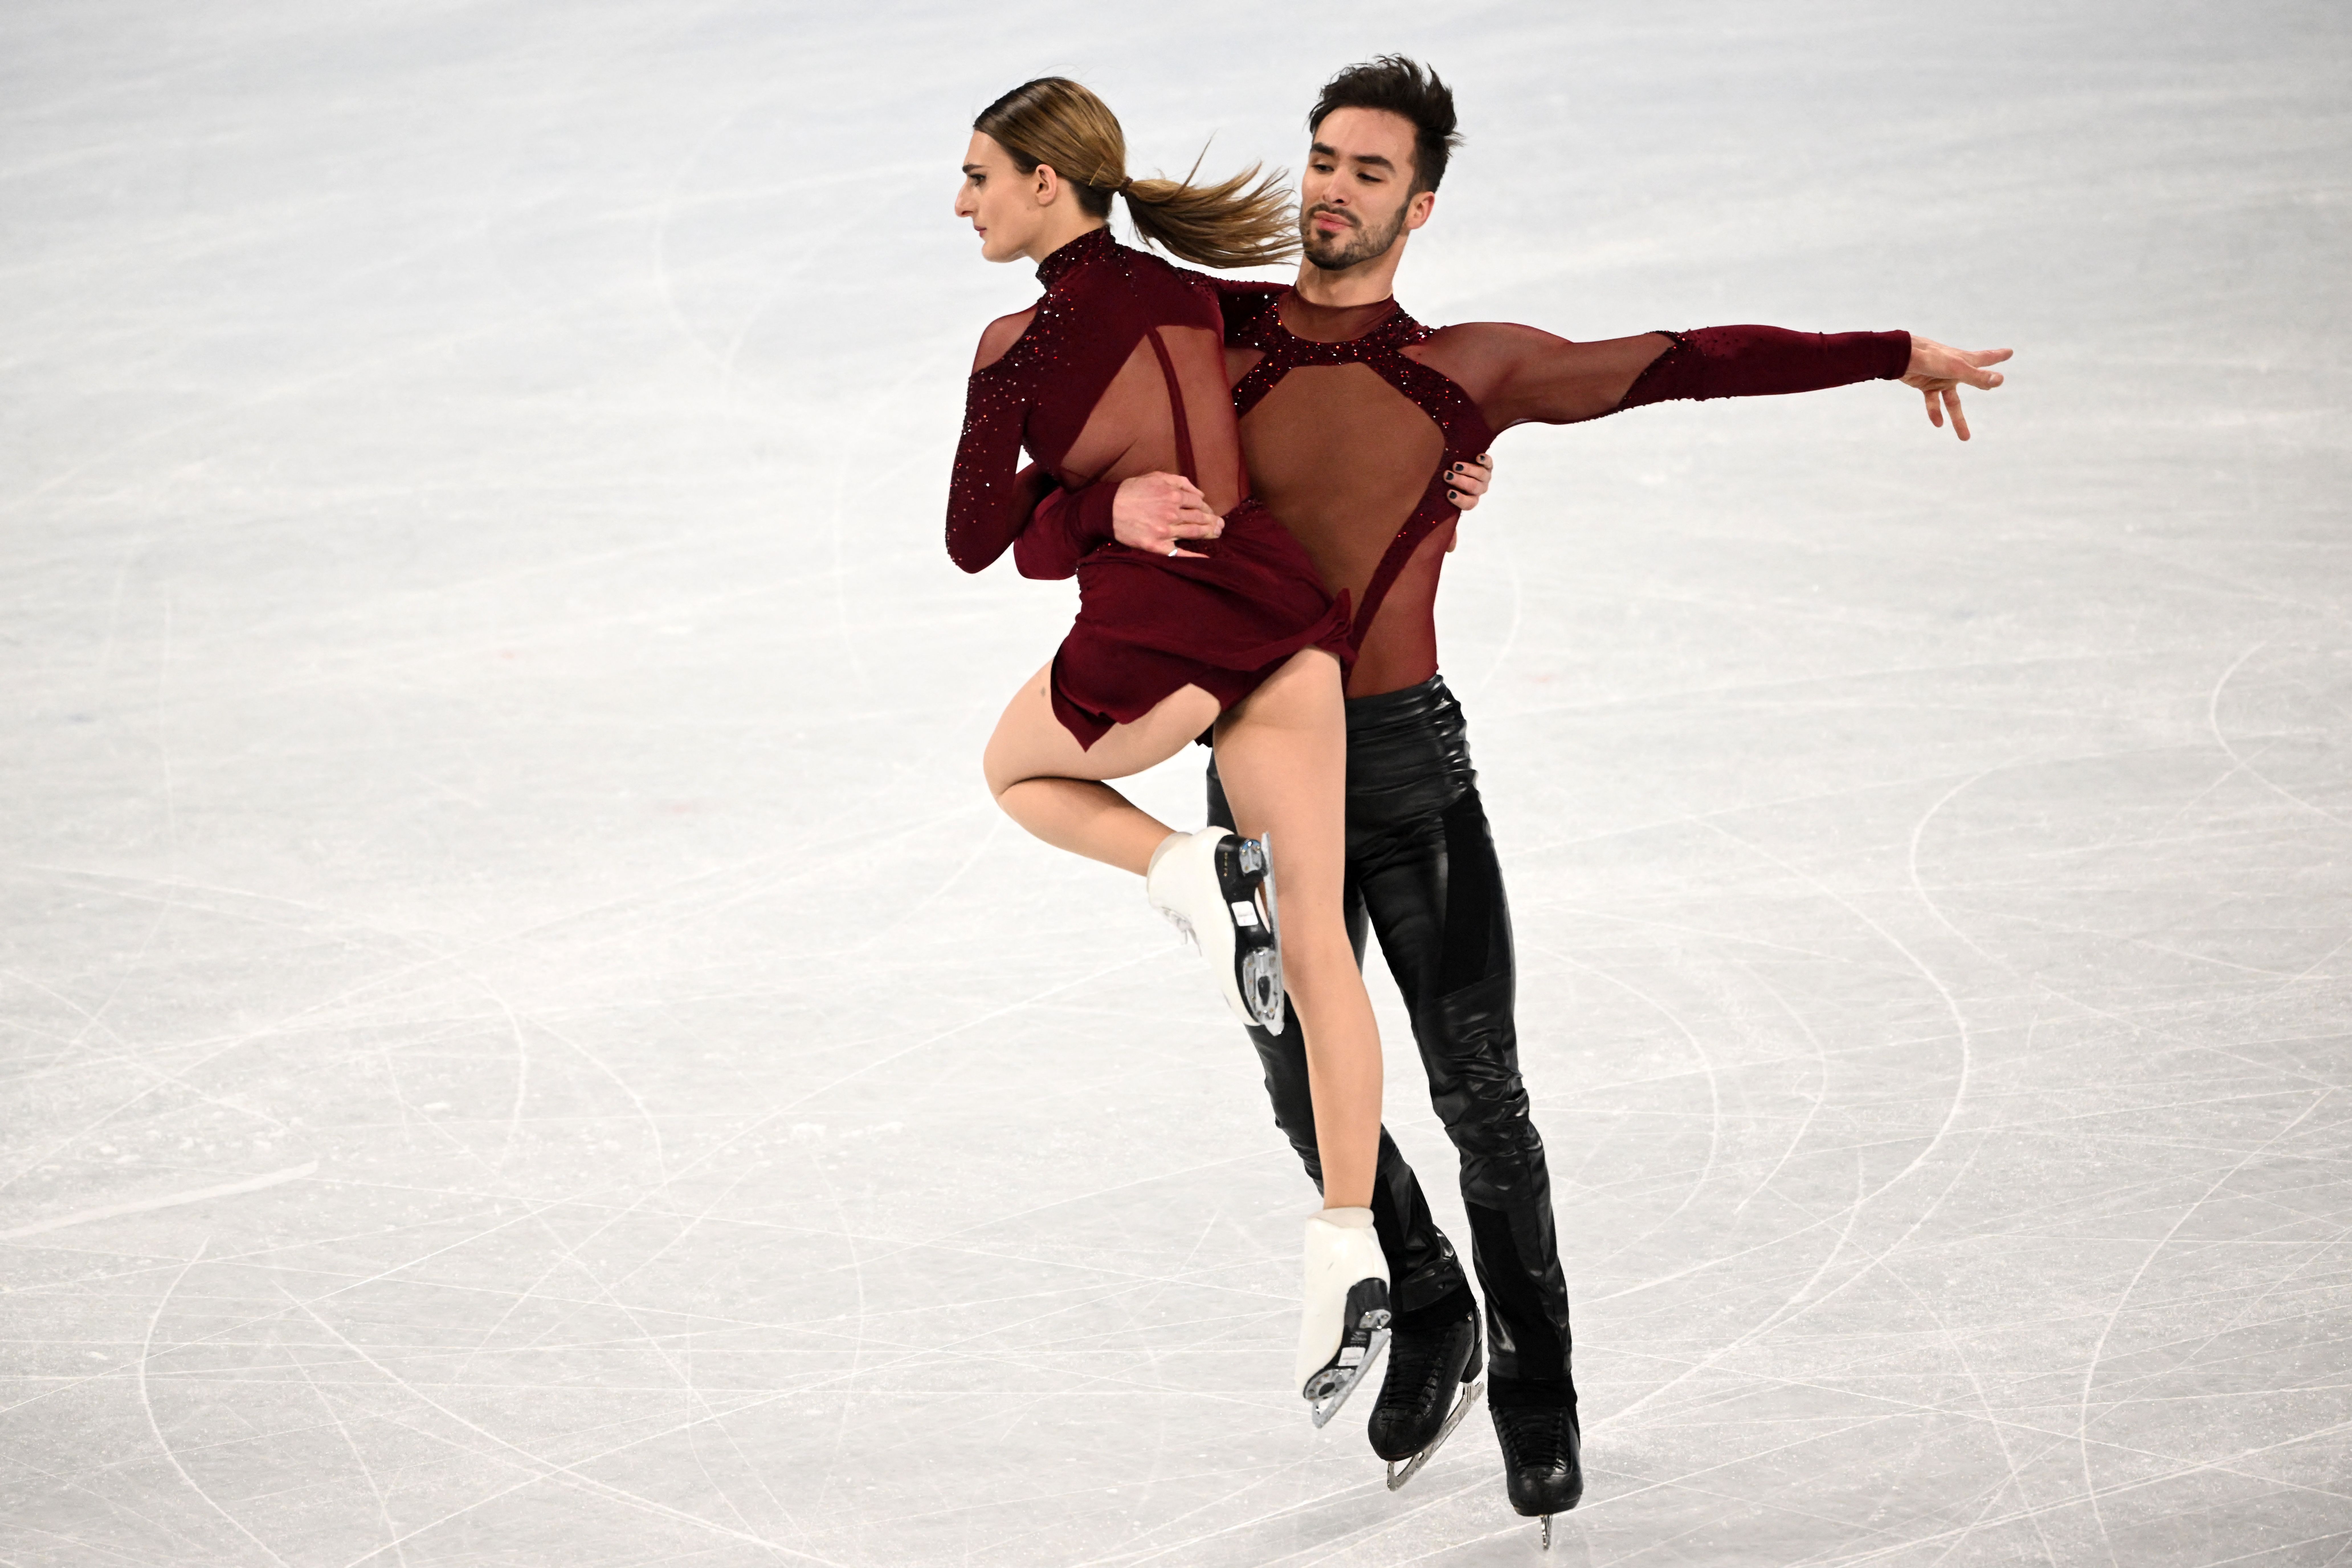  French ice dance pair Gabriella Papadakis and Guillaume Cizeron train during the Beijing 2022 Winter Olympic Games in Beijing on February 9